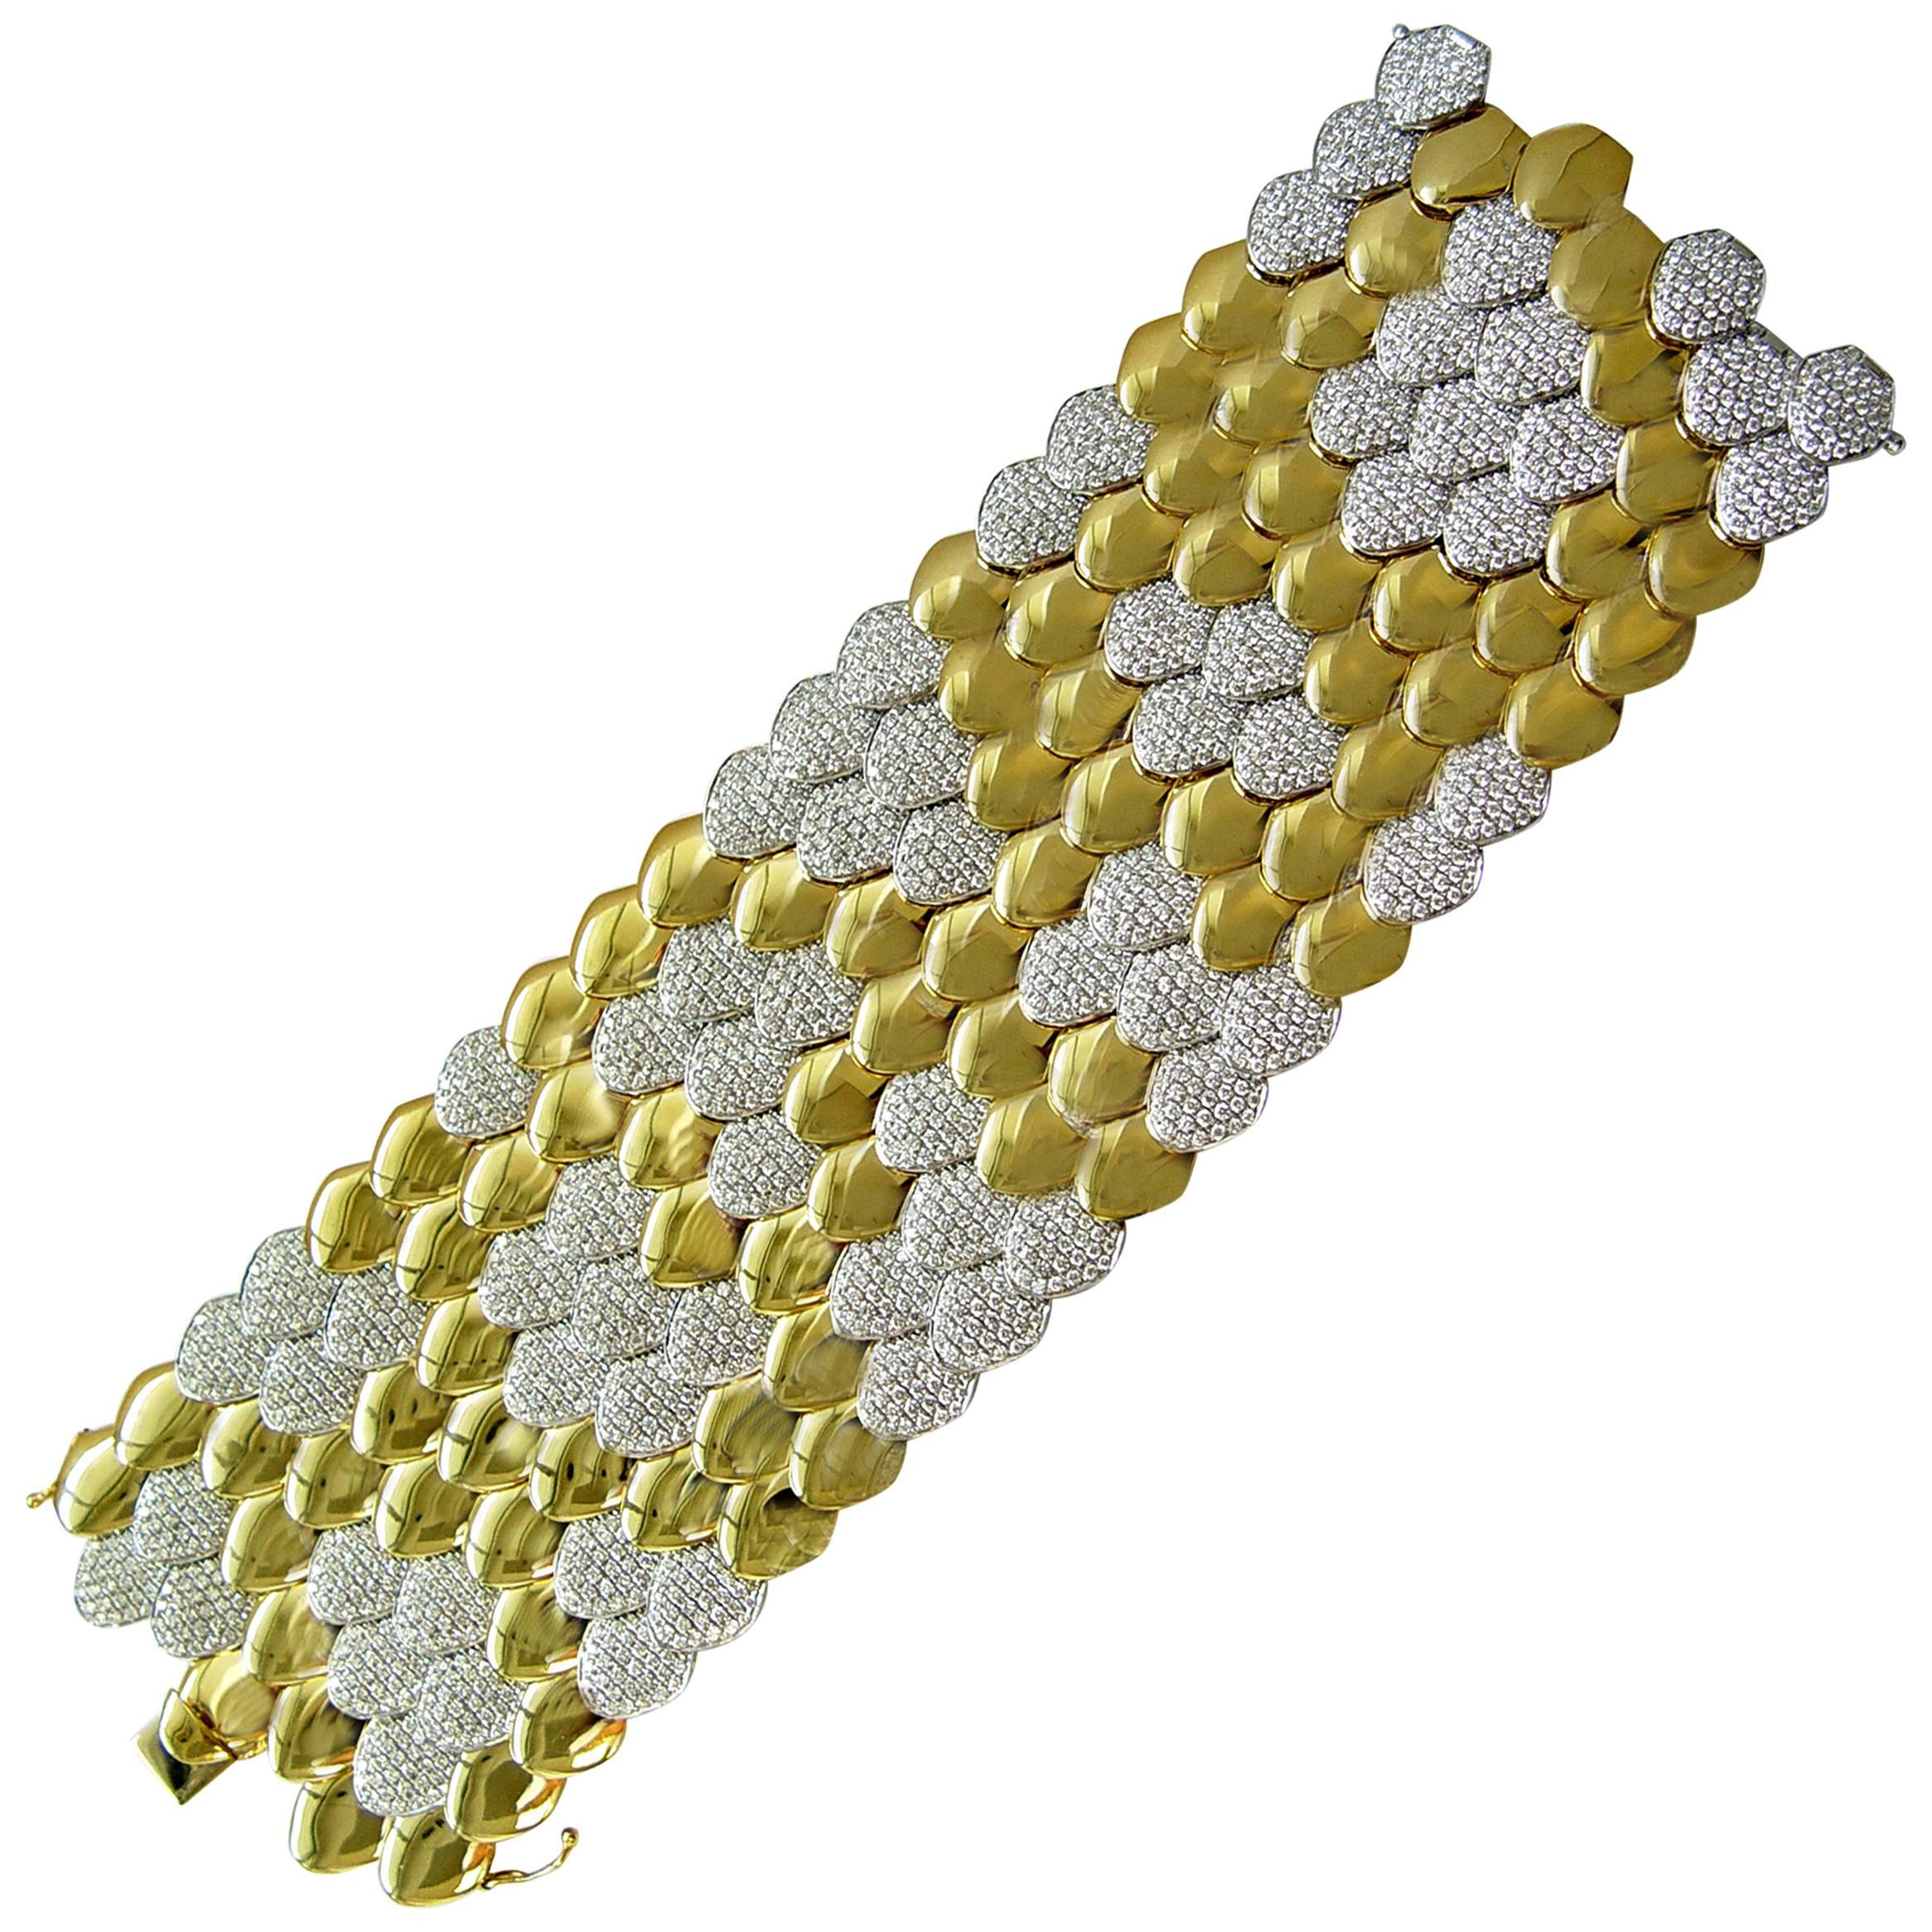 This magnificent bracelet designed to resemble fish scales pattern. The overlapping links are flexible, that makes it very comfortable to wear. The bracelet is crafted in the finest 18K yellow and white gold. Some of the sections are set with round